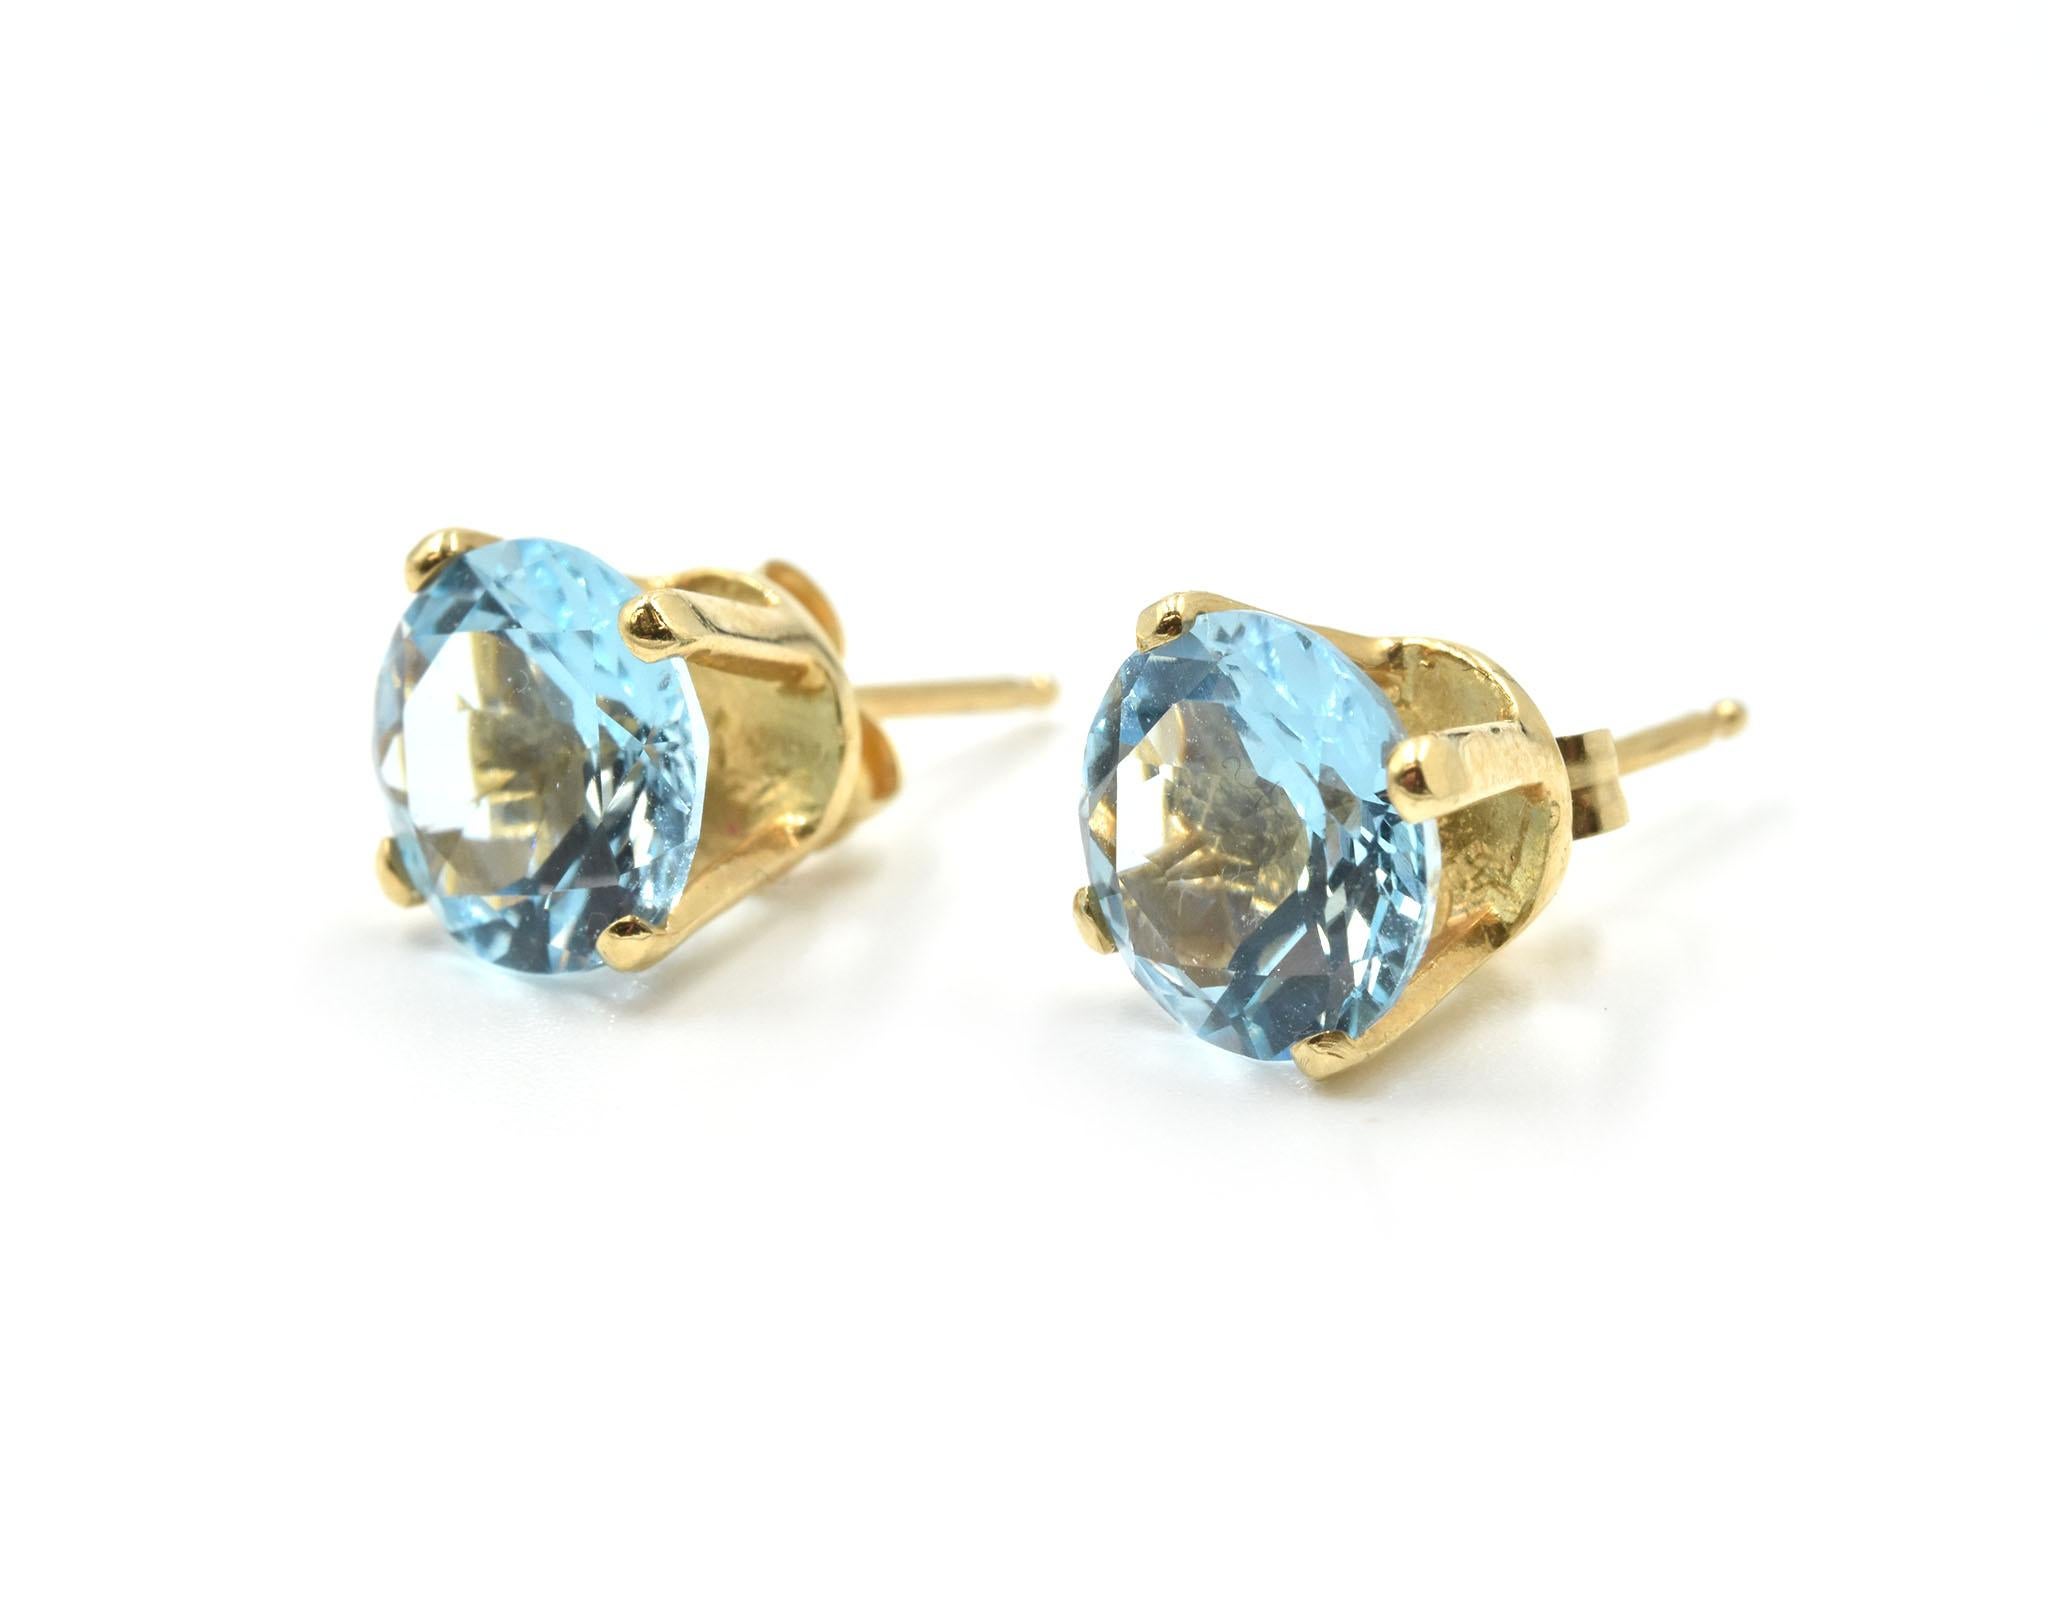 Designer: custom design
Material: 14k yellow gold
Blue Topaz: two round brilliant blue topaz = approximately 4.00 carat total weight
Fastenings: friction back fastenings
Dimensions: each earring top measures 8.00mm in diameter
Weight: 2.15 grams
